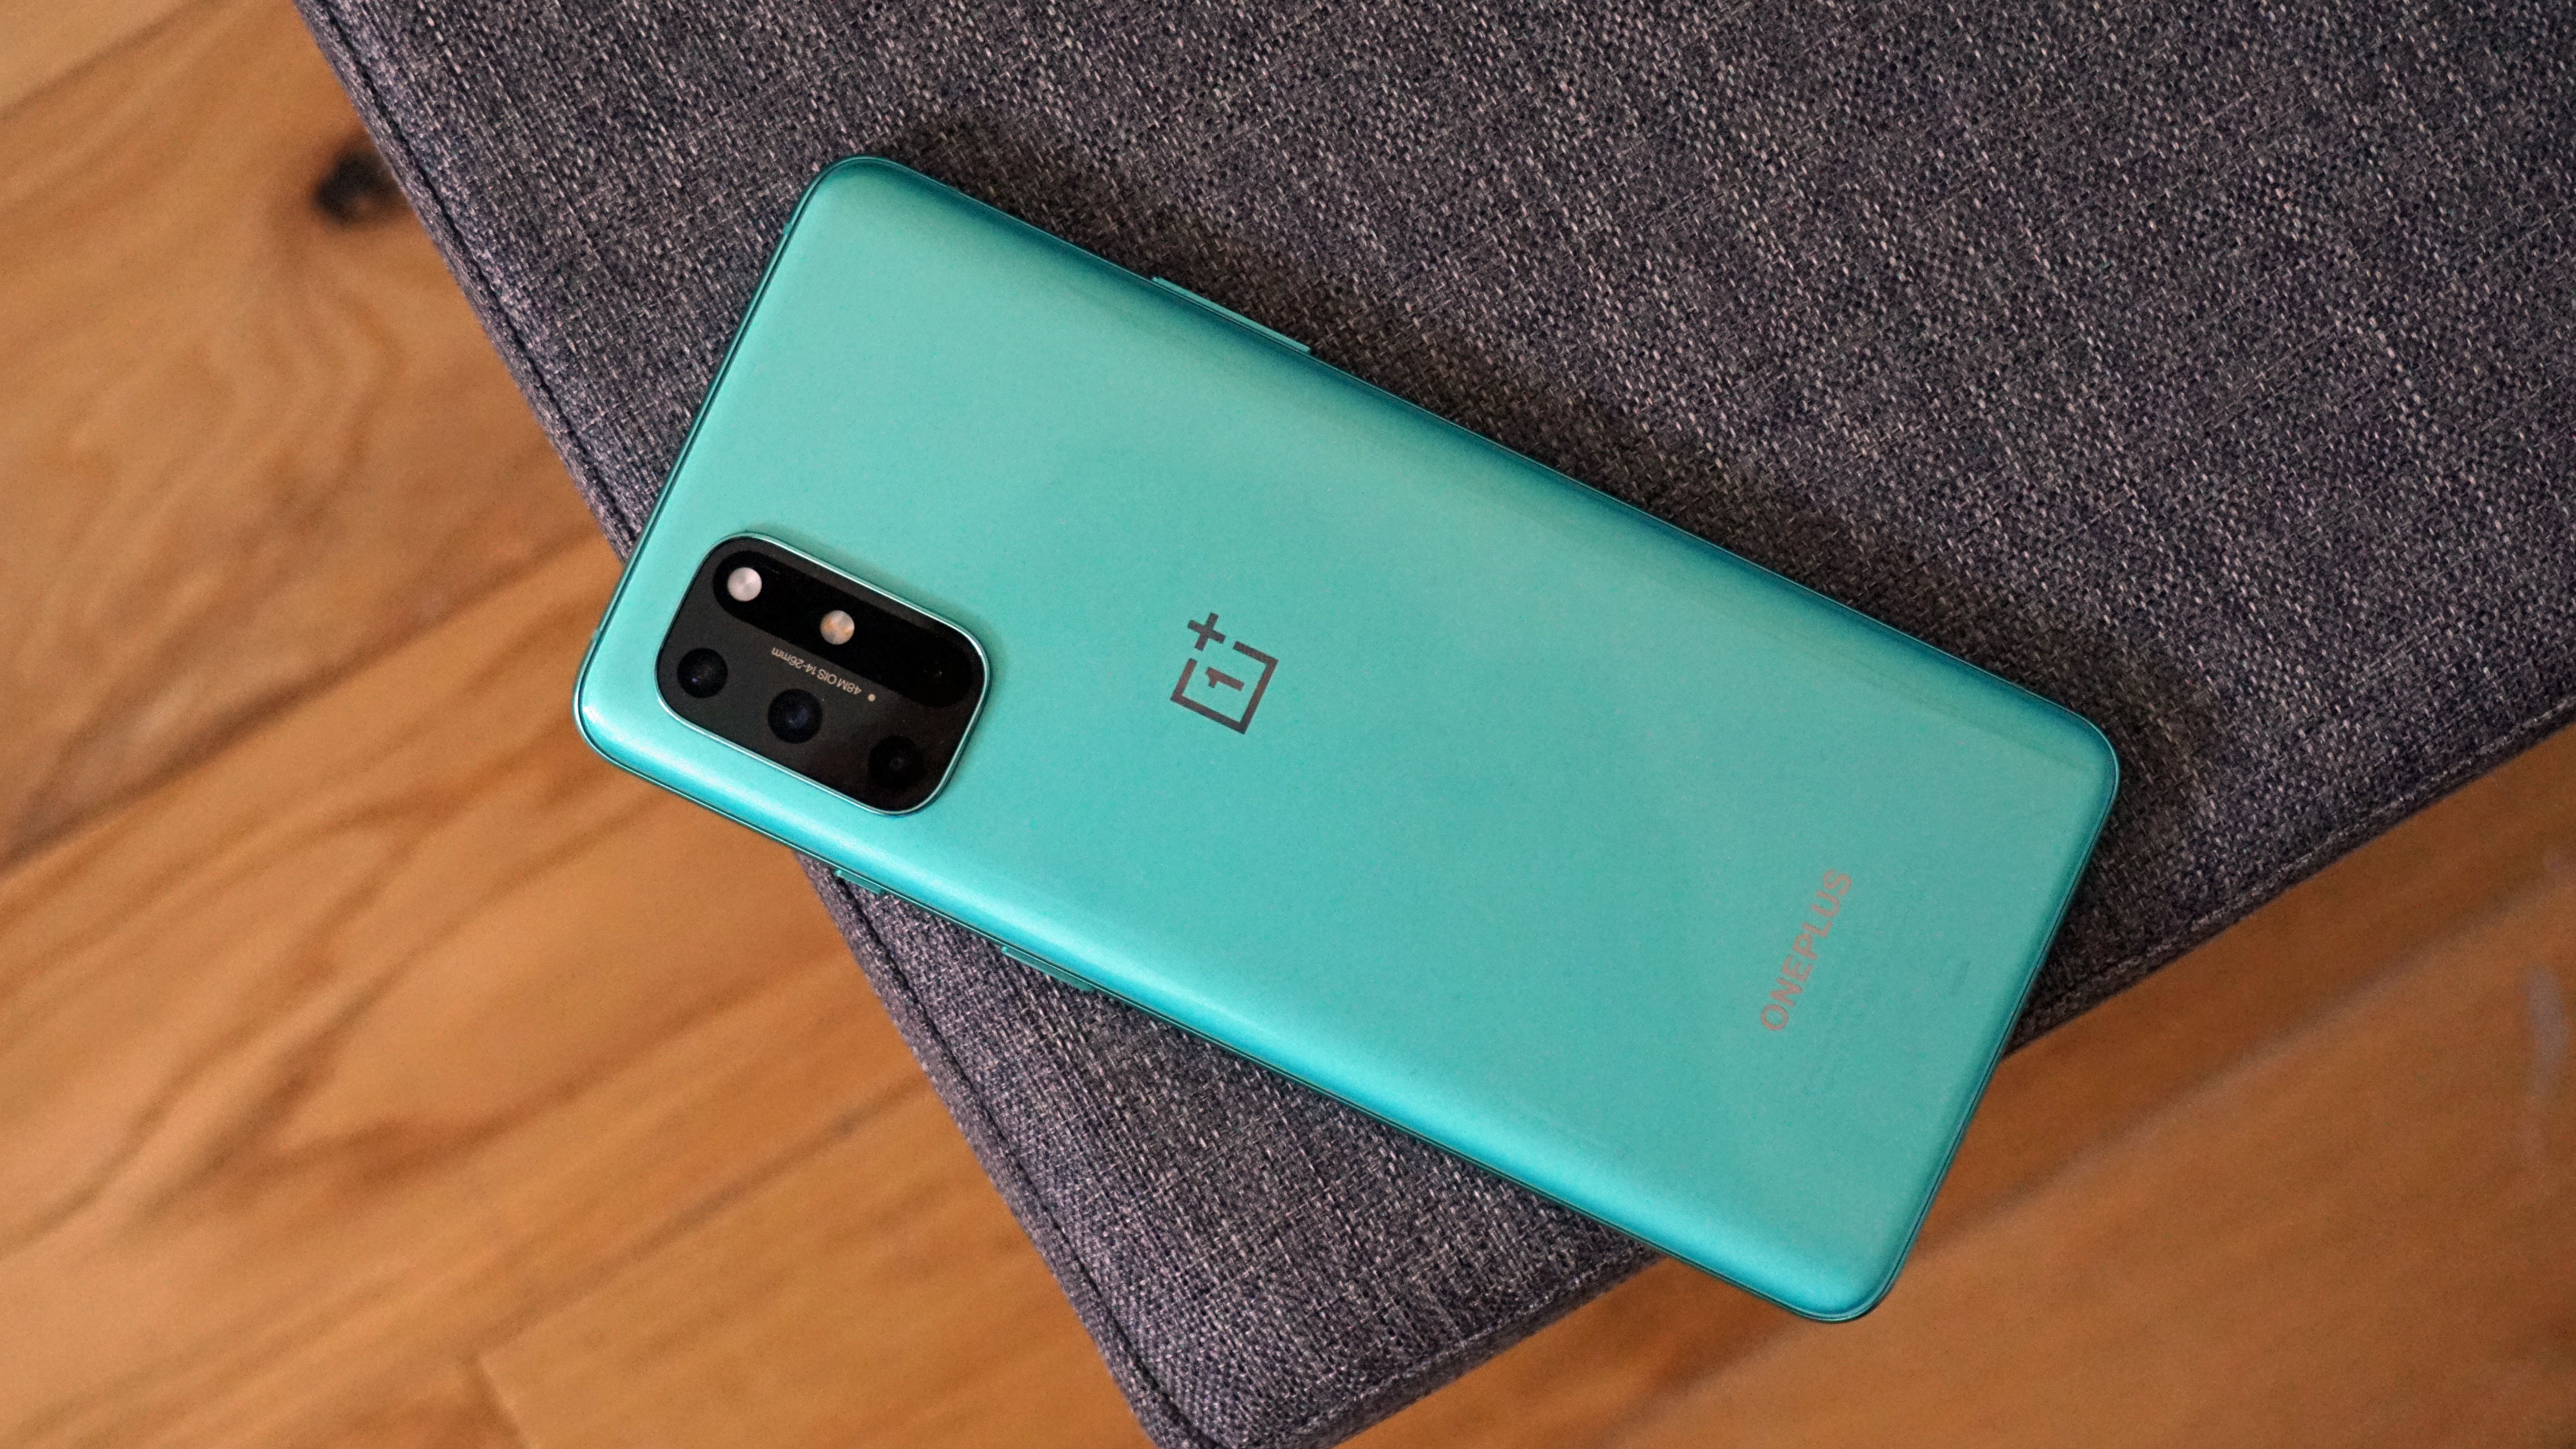 OnePlus 8T long-term review: One of the better phones of 2020